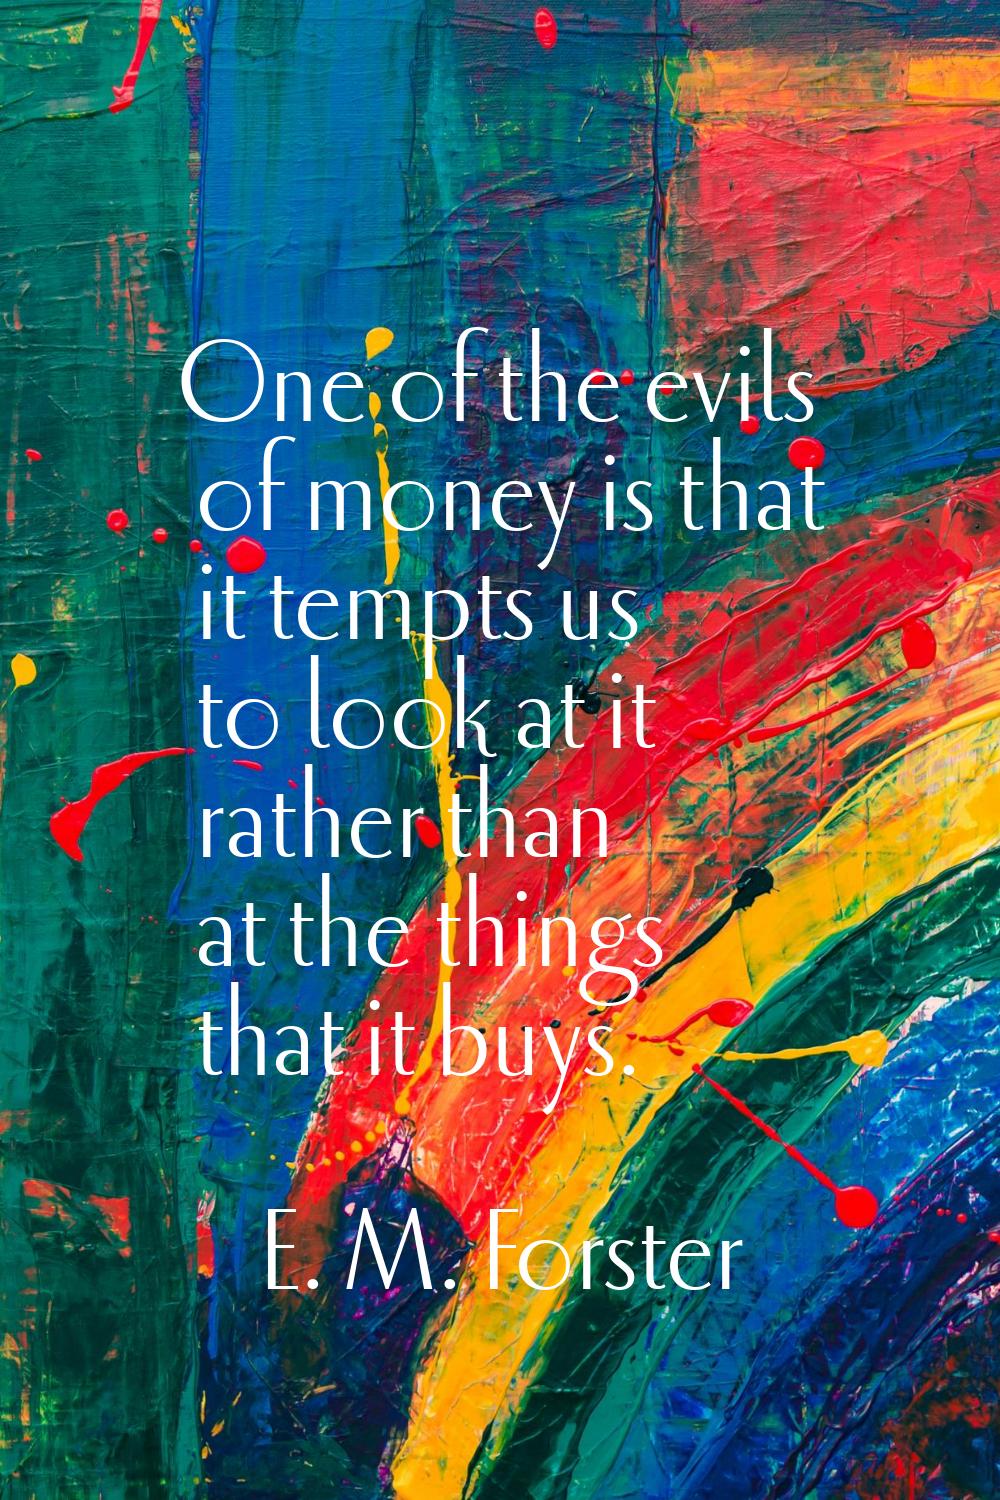 One of the evils of money is that it tempts us to look at it rather than at the things that it buys